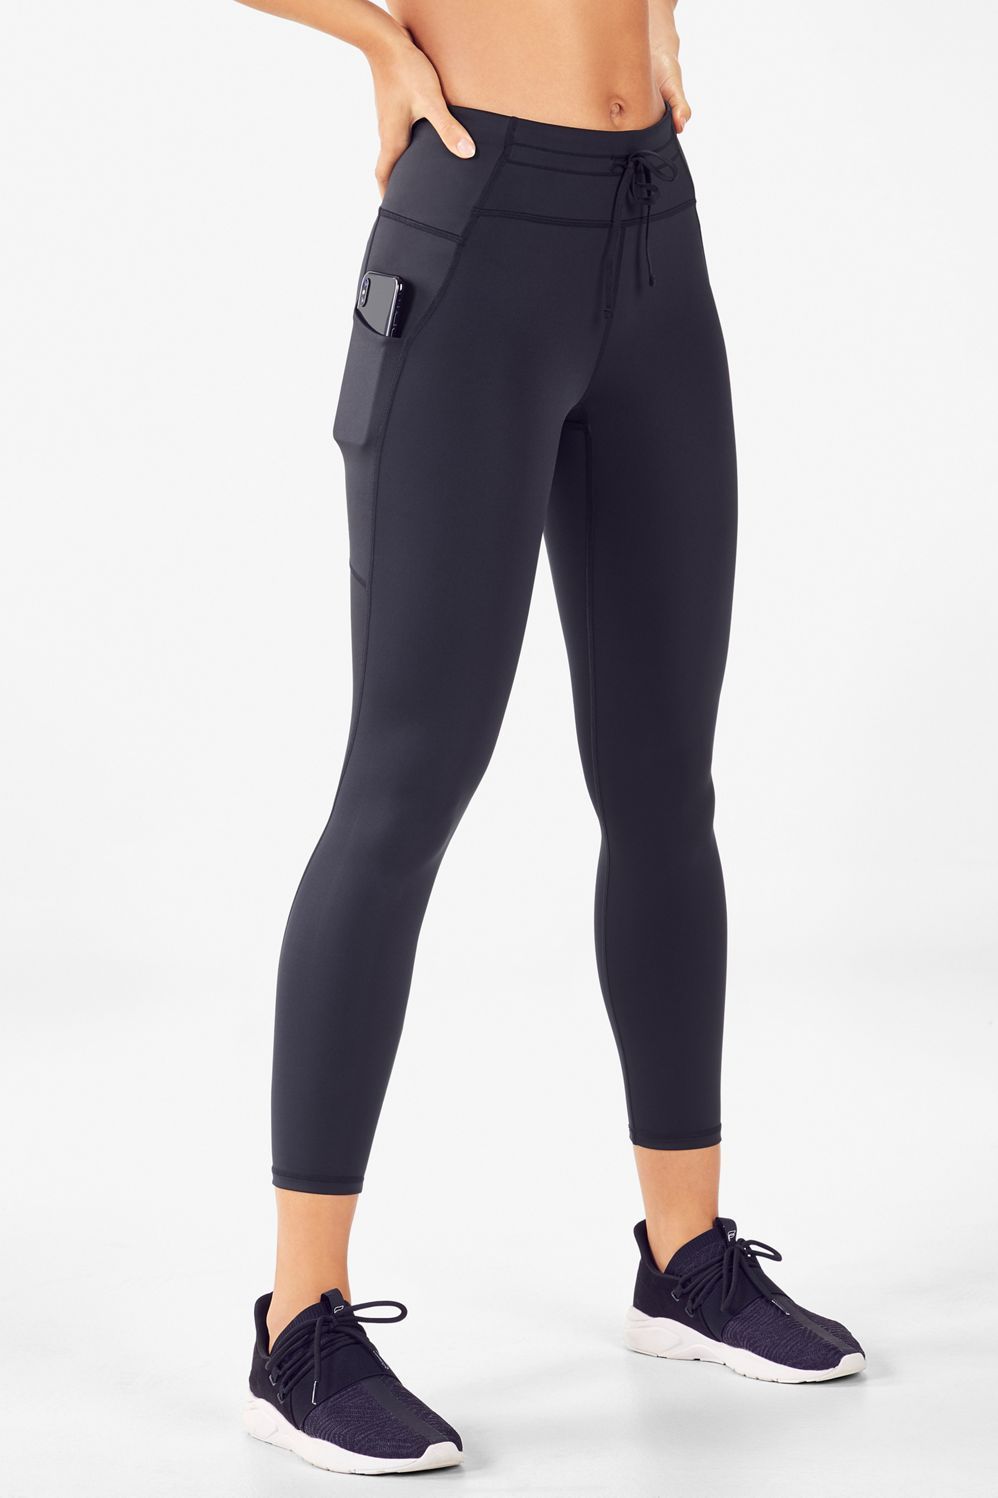 Review Analysis + Pros/Cons - Fengbay High Waist Yoga Pants Pocket